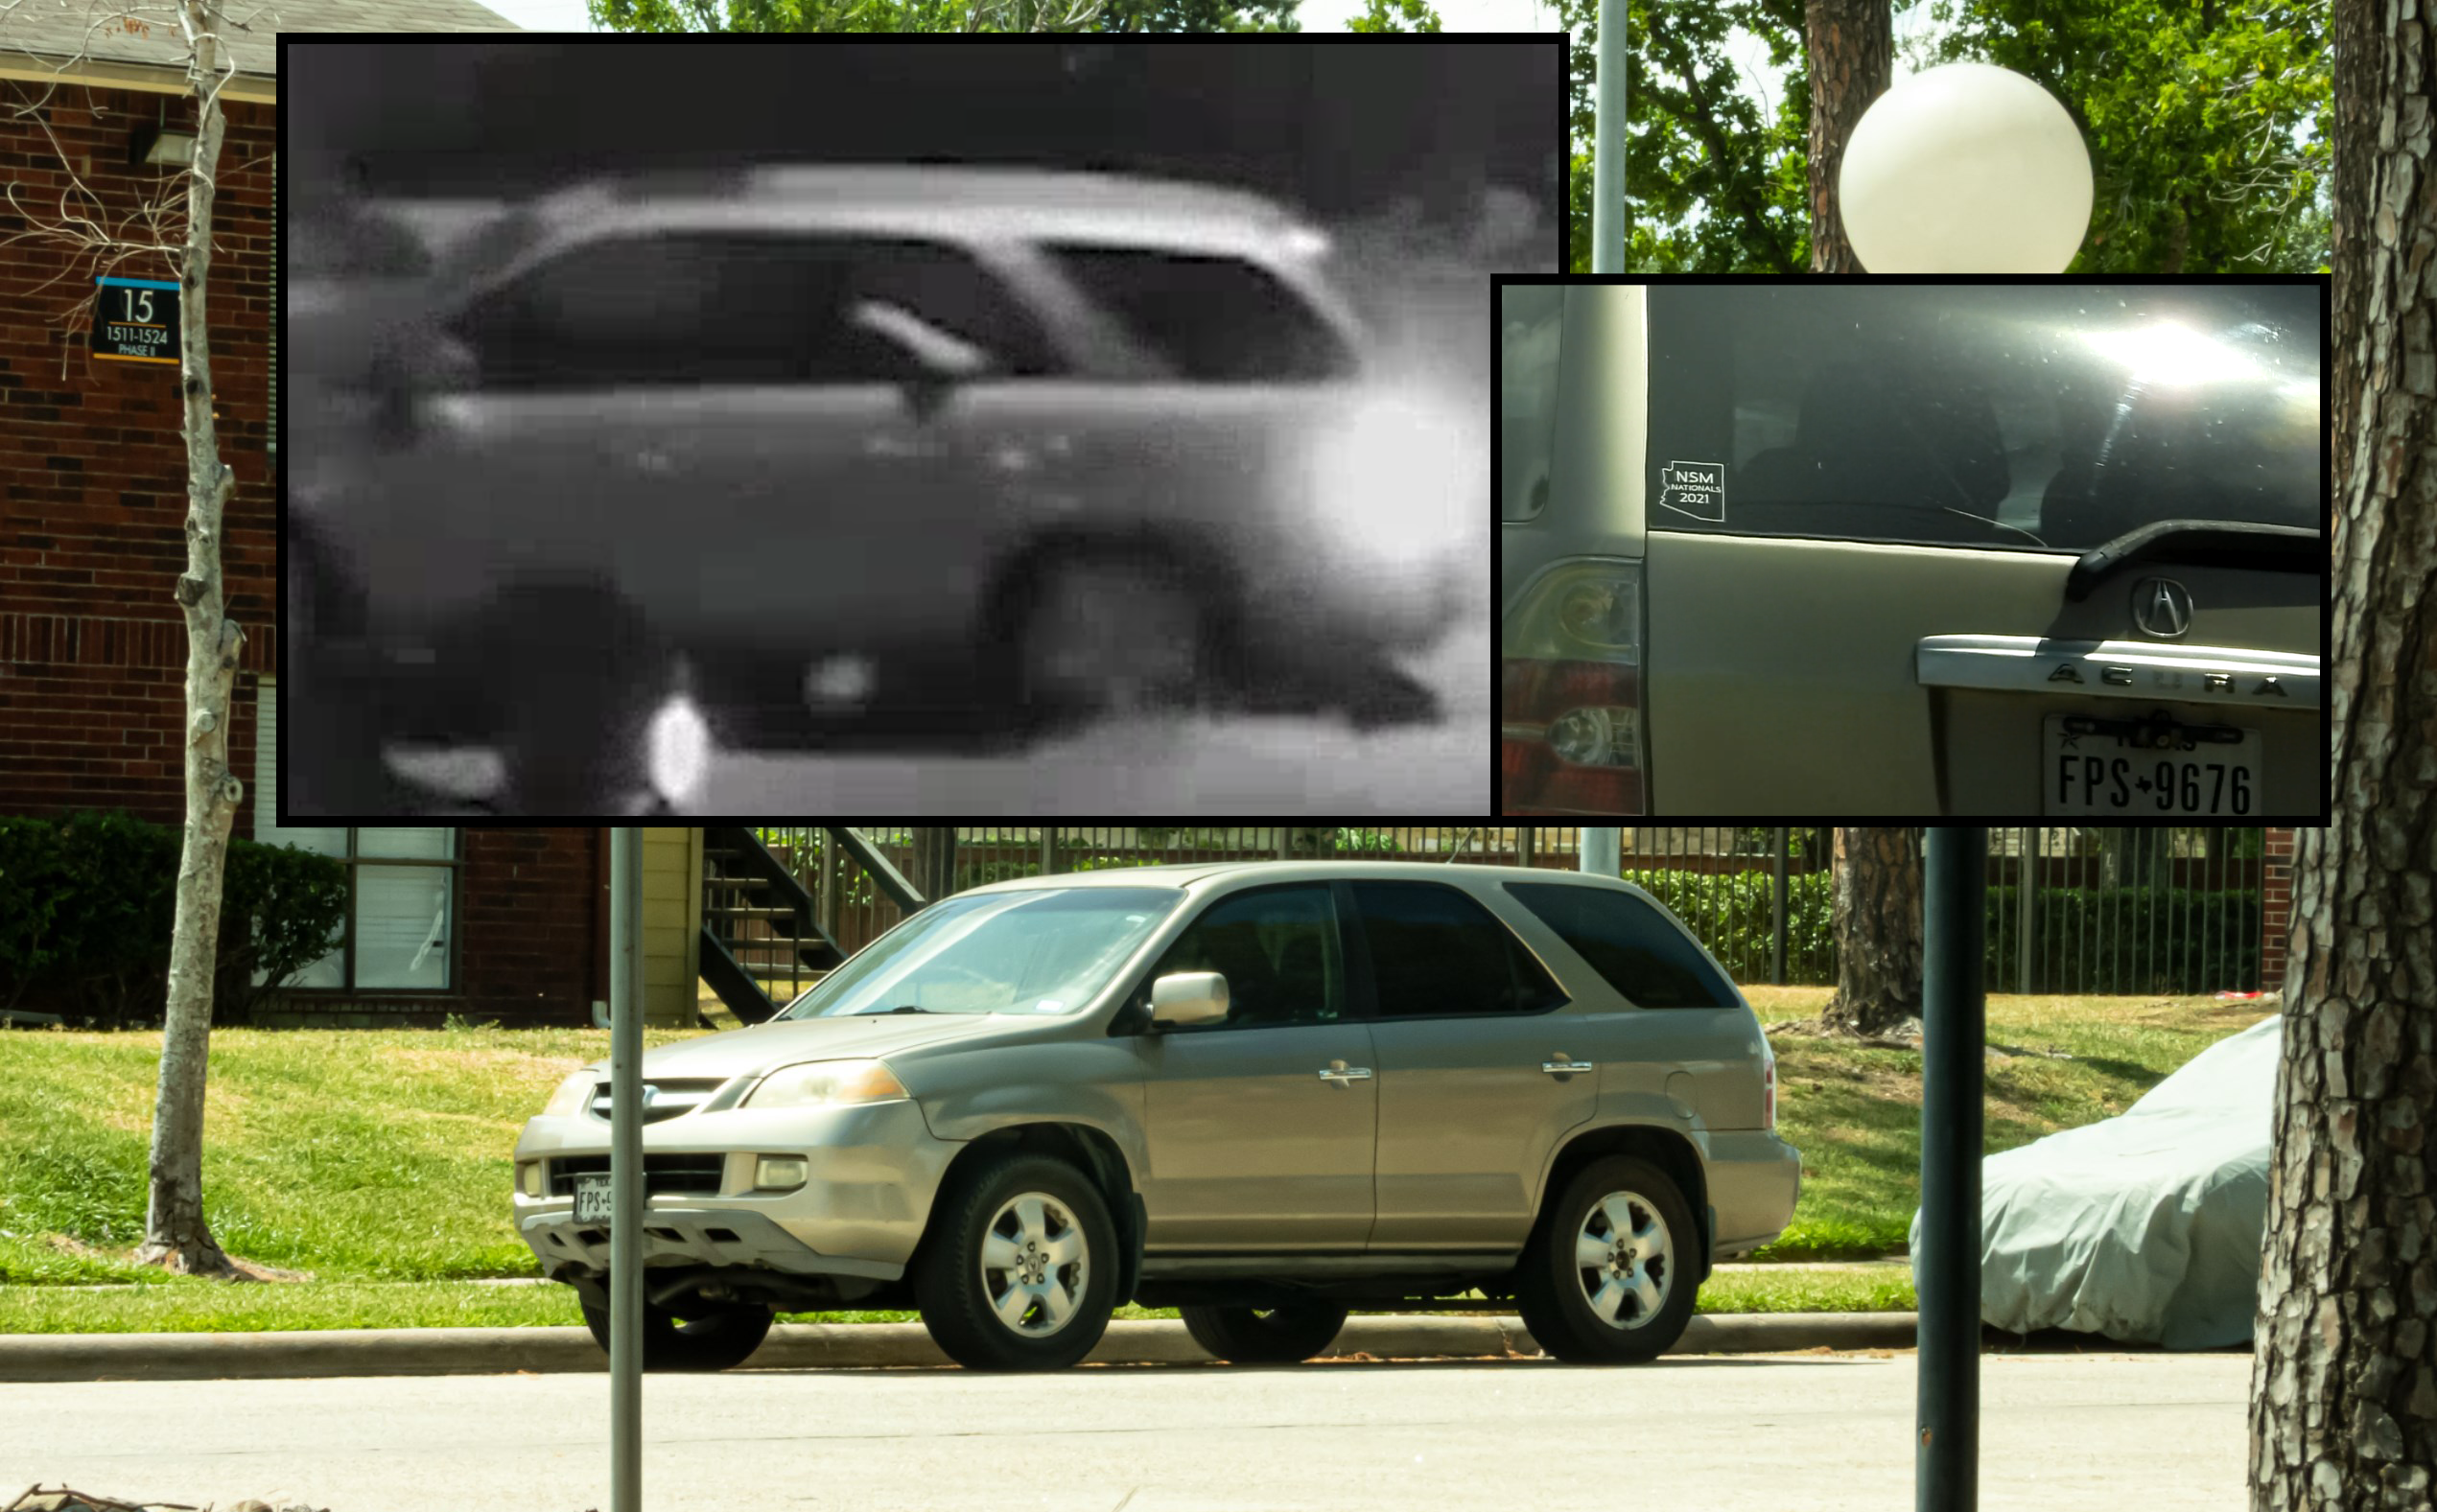 Ronald Murray's Tan SUV is pictured in front of his apartment, compared to the same vehicle seen in Ring footage by victims of his racist flyers. A National Socialist Movement (NSM) sticker sits on the back windshield of the vehicle.